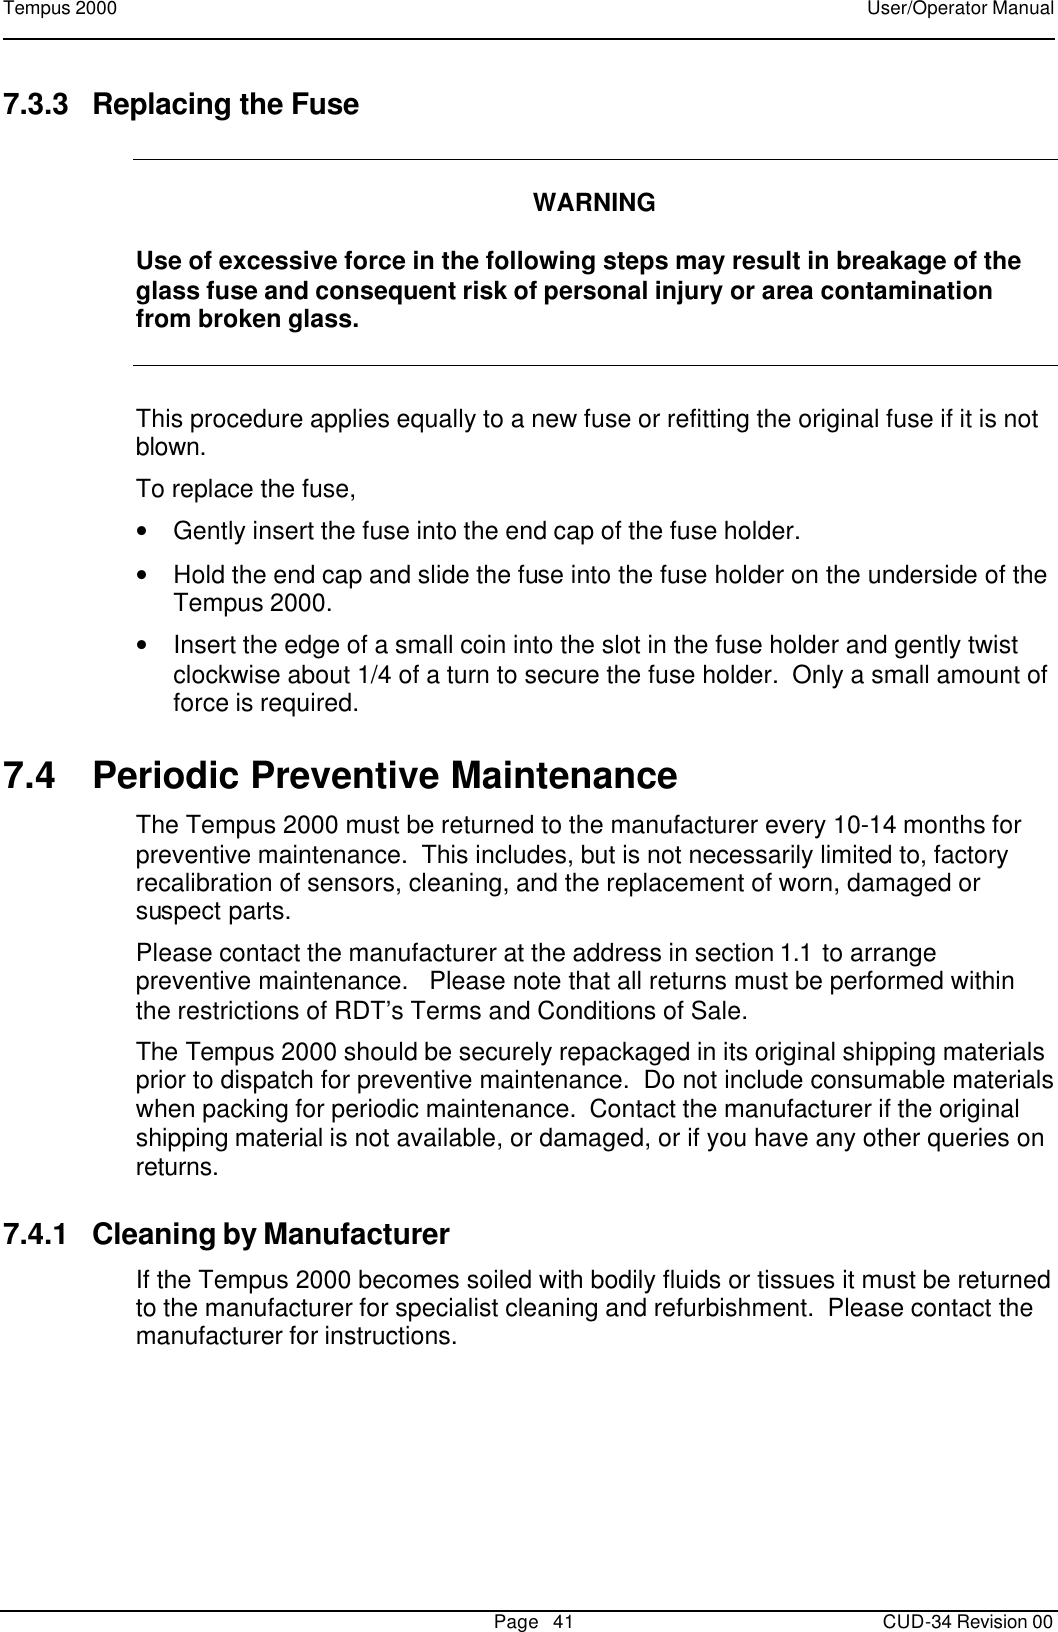 Tempus 2000    User/Operator Manual       Page   41   CUD-34 Revision 00 7.3.3 Replacing the Fuse     WARNING  Use of excessive force in the following steps may result in breakage of the glass fuse and consequent risk of personal injury or area contamination from broken glass.  This procedure applies equally to a new fuse or refitting the original fuse if it is not blown. To replace the fuse, • Gently insert the fuse into the end cap of the fuse holder.   • Hold the end cap and slide the fuse into the fuse holder on the underside of the Tempus 2000. • Insert the edge of a small coin into the slot in the fuse holder and gently twist clockwise about 1/4 of a turn to secure the fuse holder.  Only a small amount of force is required. 7.4 Periodic Preventive Maintenance The Tempus 2000 must be returned to the manufacturer every 10-14 months for preventive maintenance.  This includes, but is not necessarily limited to, factory recalibration of sensors, cleaning, and the replacement of worn, damaged or suspect parts.   Please contact the manufacturer at the address in section 1.1 to arrange preventive maintenance.   Please note that all returns must be performed within the restrictions of RDT’s Terms and Conditions of Sale. The Tempus 2000 should be securely repackaged in its original shipping materials prior to dispatch for preventive maintenance.  Do not include consumable materials when packing for periodic maintenance.  Contact the manufacturer if the original shipping material is not available, or damaged, or if you have any other queries on returns. 7.4.1 Cleaning by Manufacturer If the Tempus 2000 becomes soiled with bodily fluids or tissues it must be returned to the manufacturer for specialist cleaning and refurbishment.  Please contact the manufacturer for instructions.  